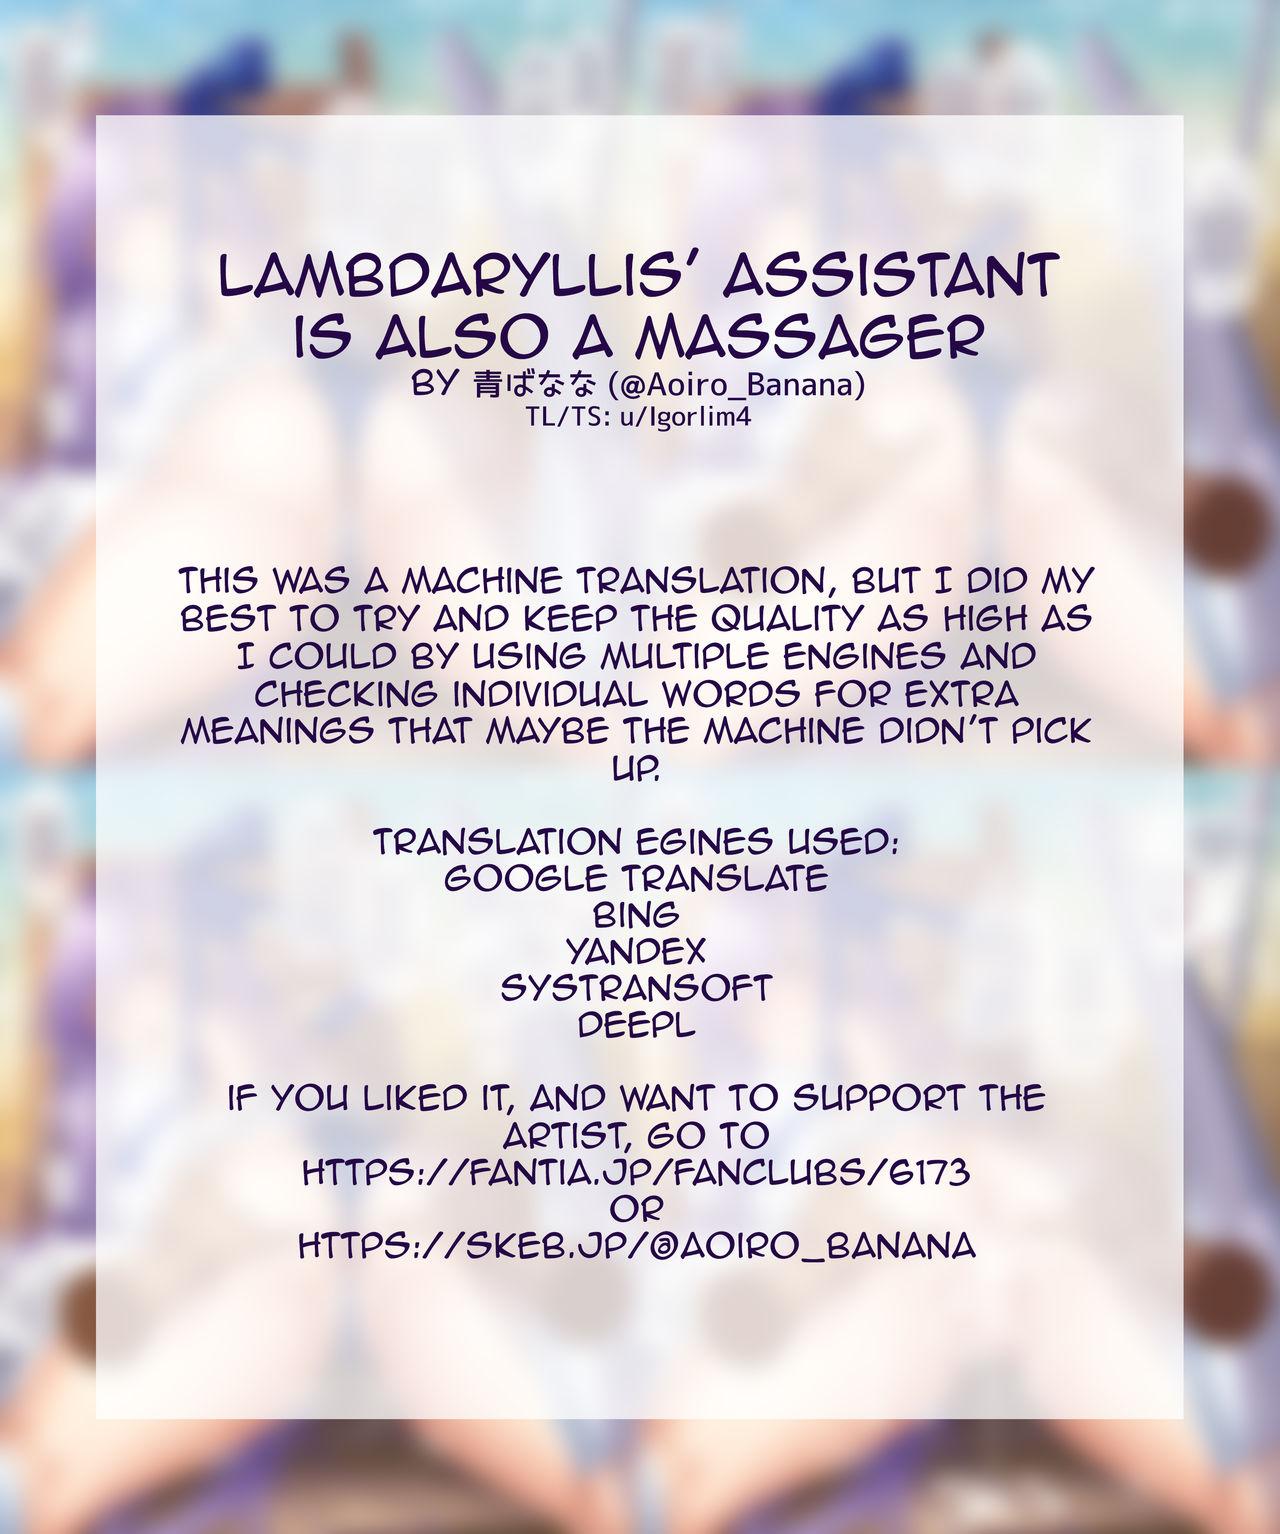 Lambdaryllis' Assistant is also a masseur 4